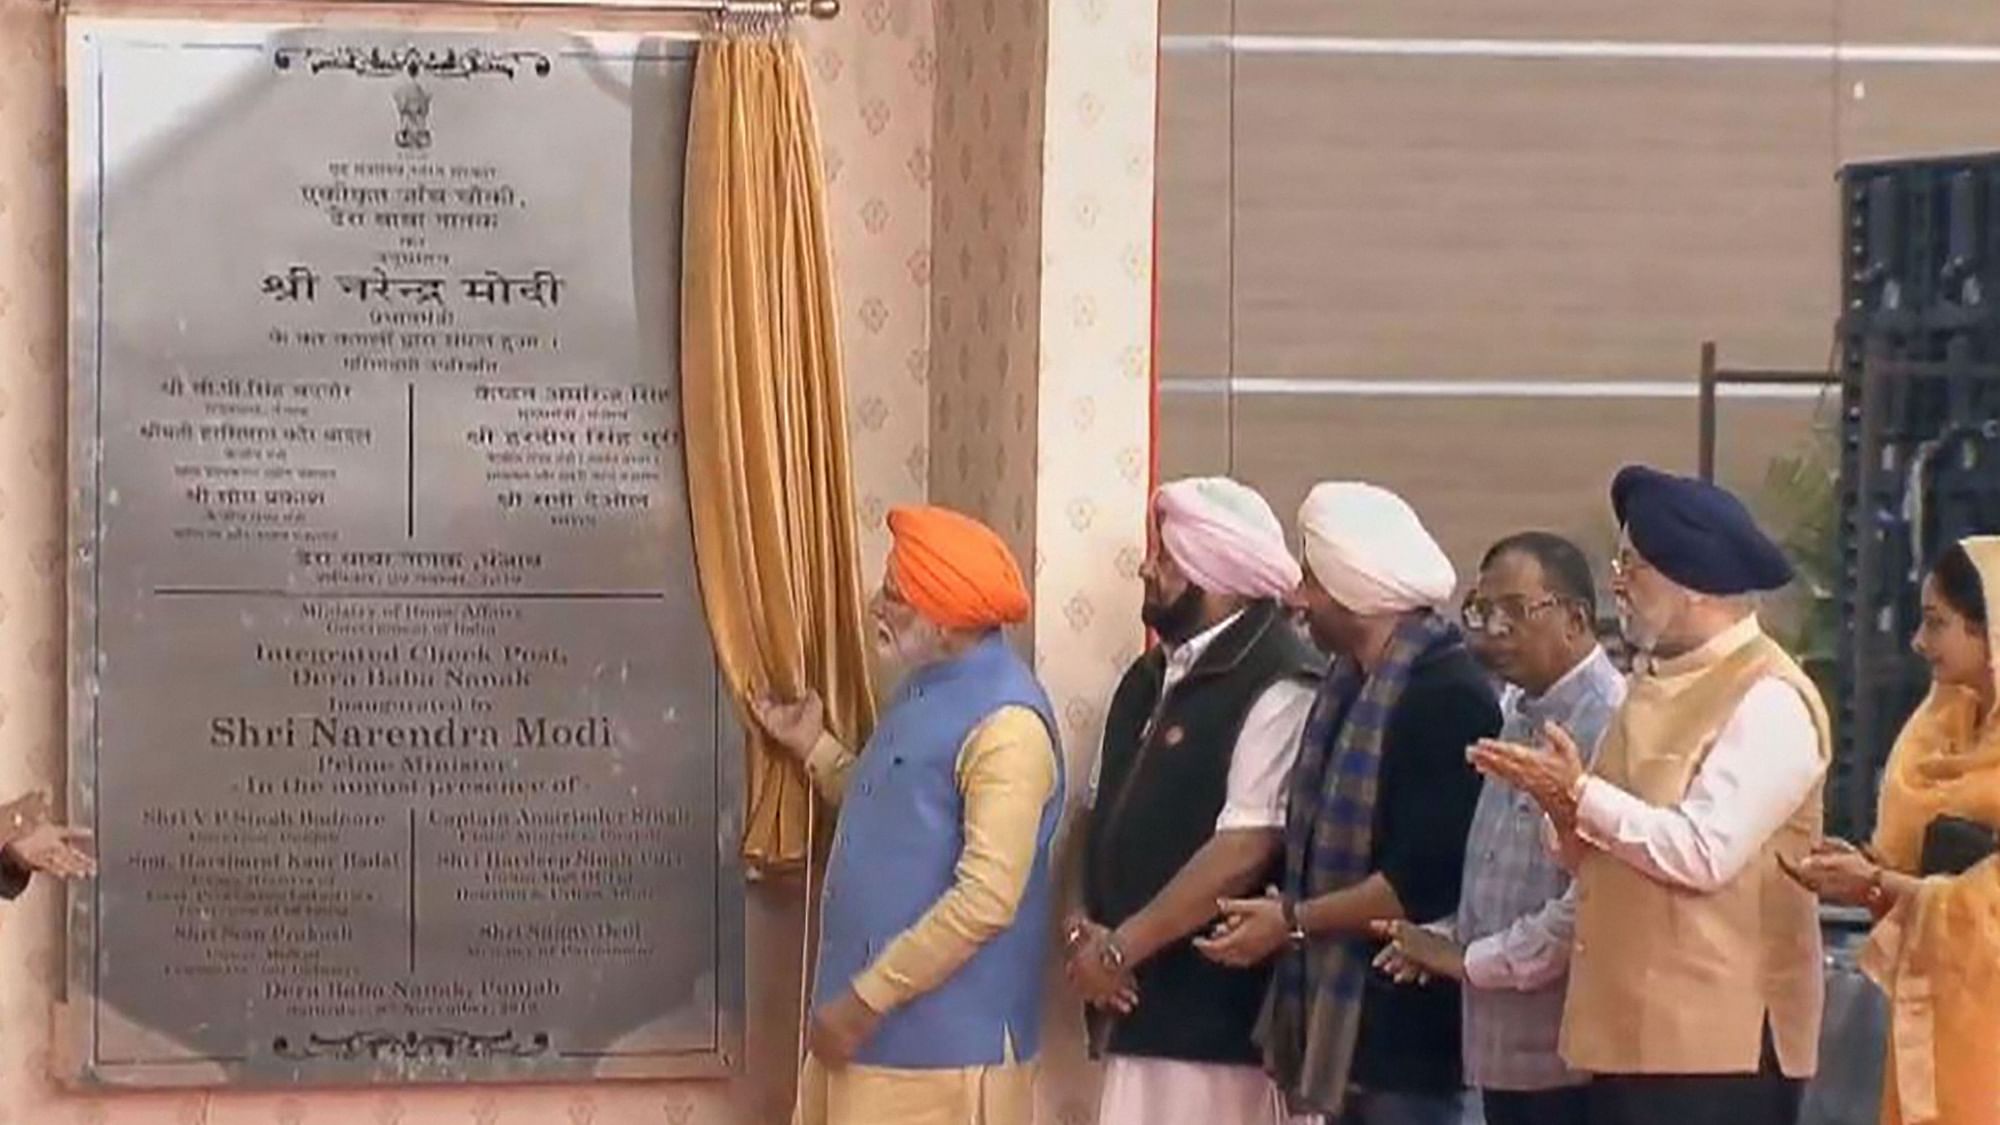 Prime Minister Narendra Modi unveils a plaque during the inauguration of the integrated check-post of Kartarpur Corridor at Dera Baba Nanak in Gurdaspur ON 9 November 2019.